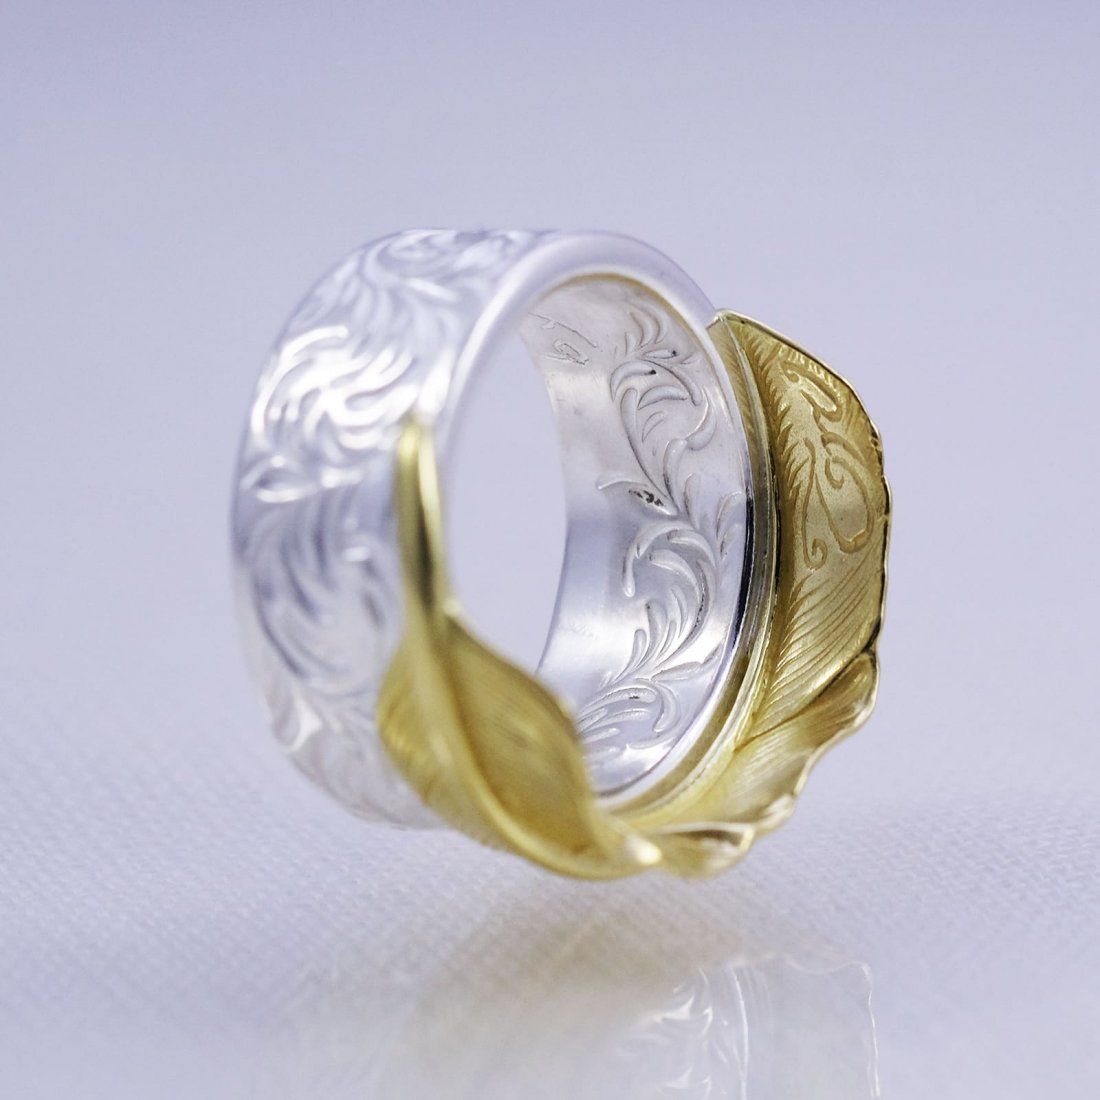 STUDIO T&Y - K18 Feather Ring 1 (GOLD/SILVER) / 18金フェザー 